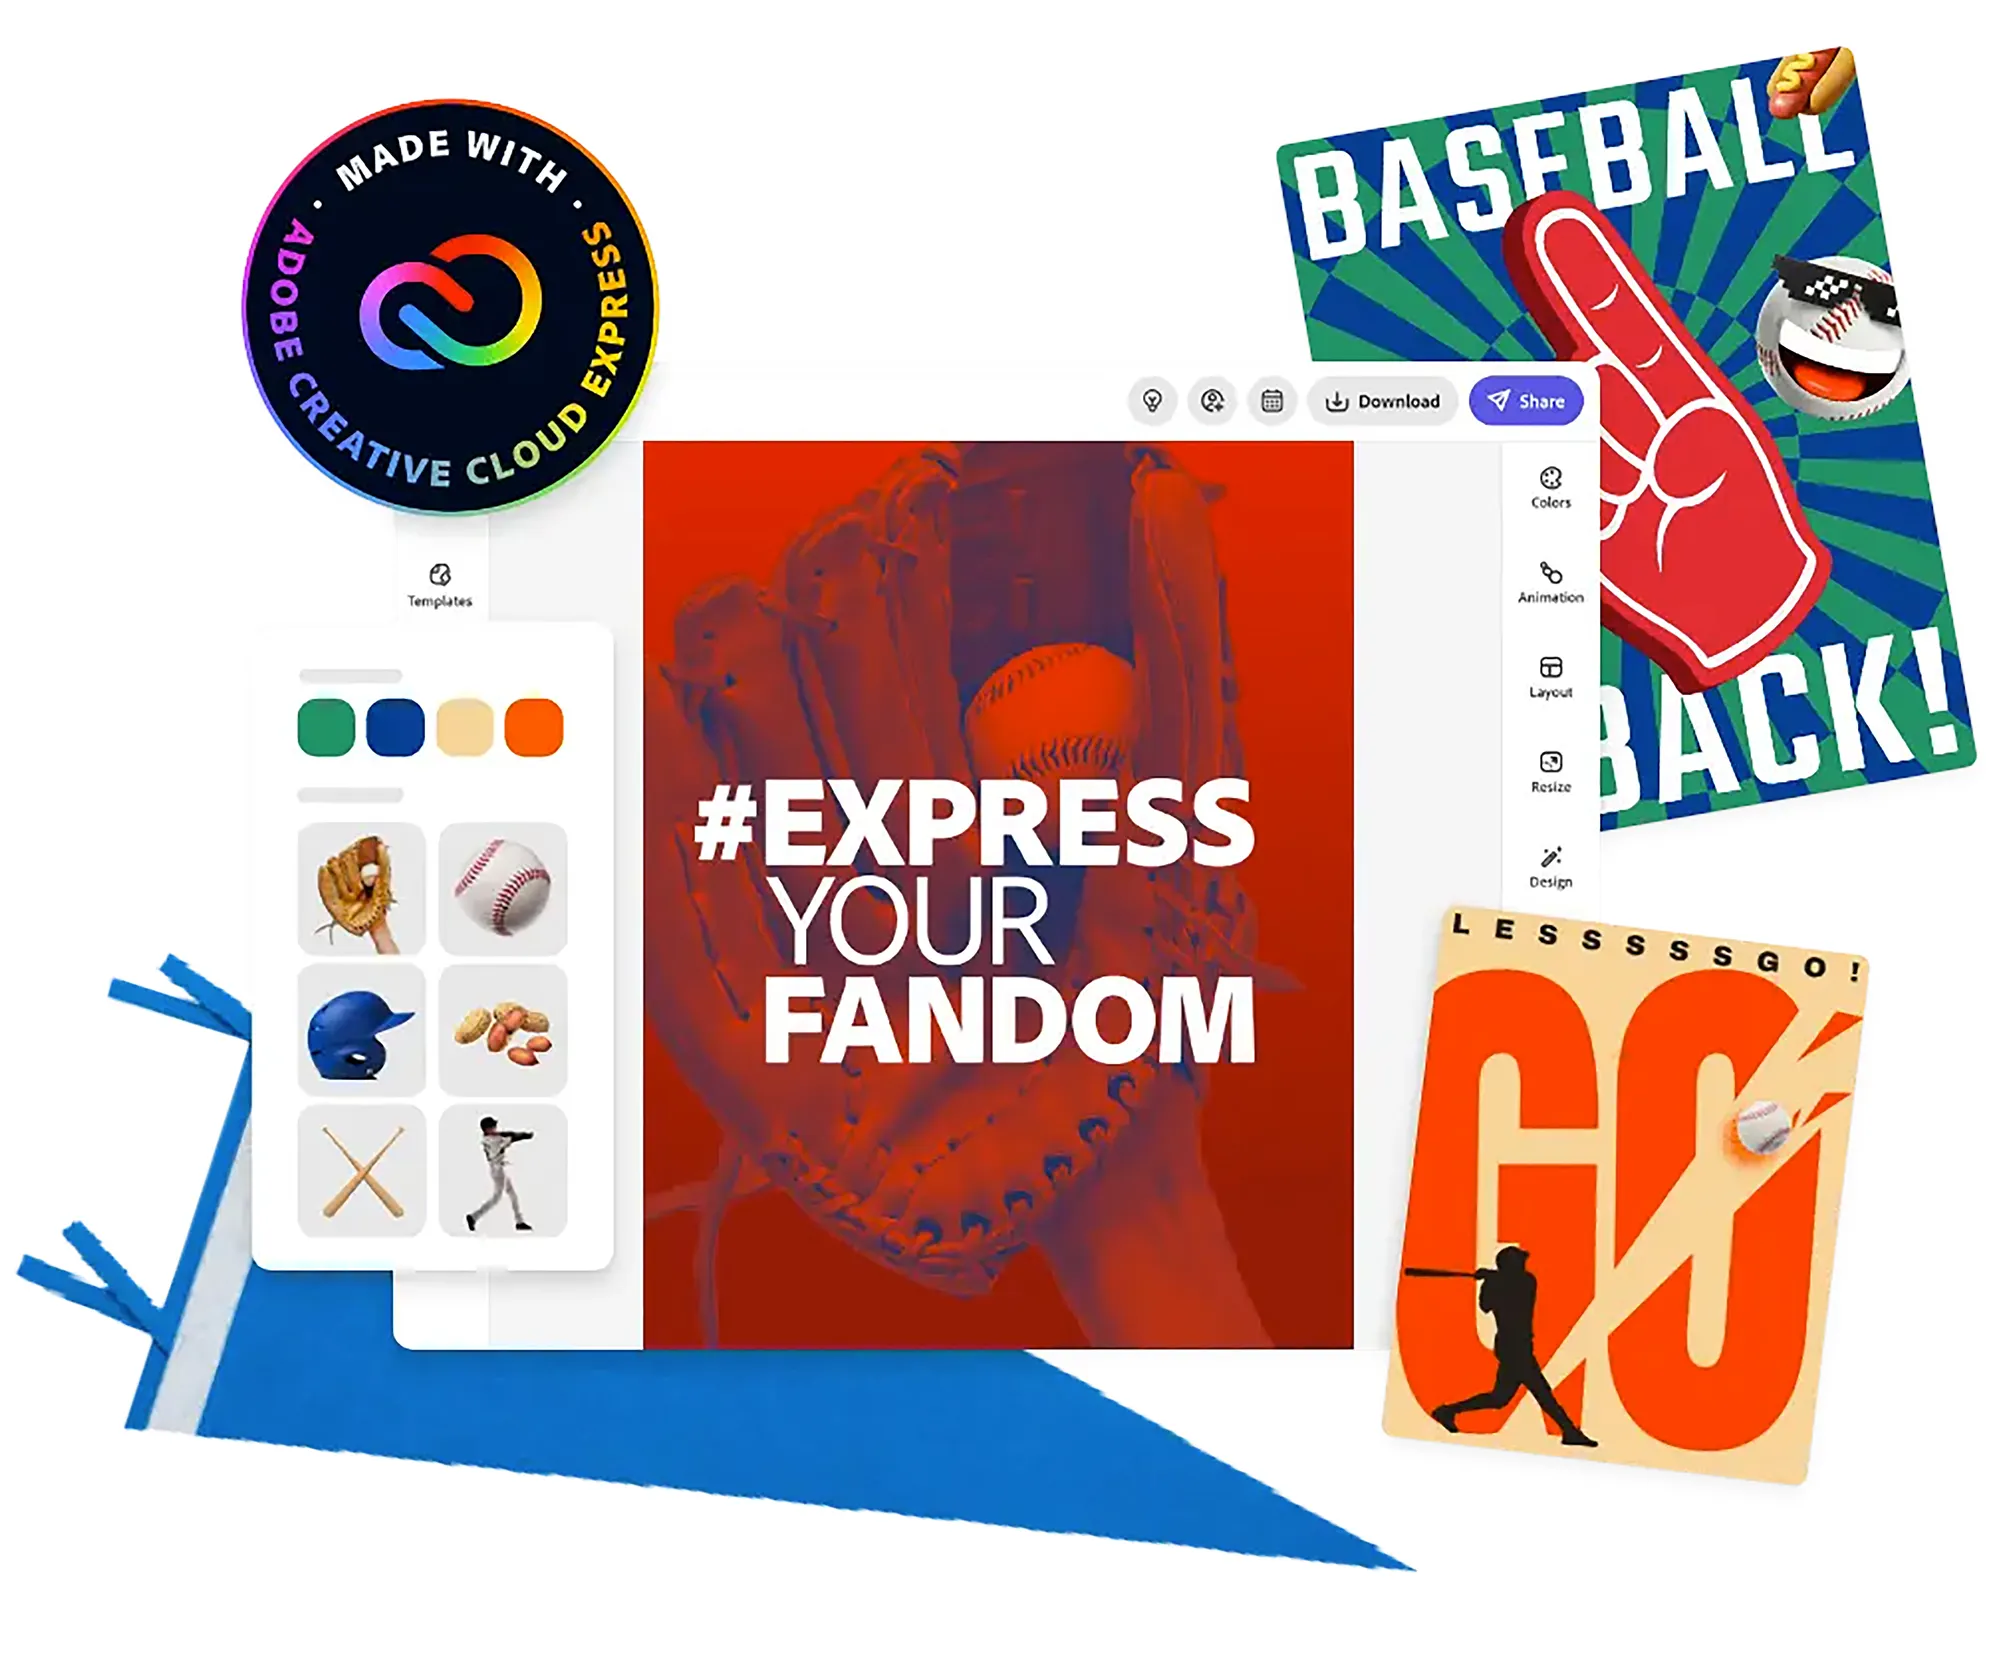 Creative Cloud Express & #ExpressYourFandom campaign